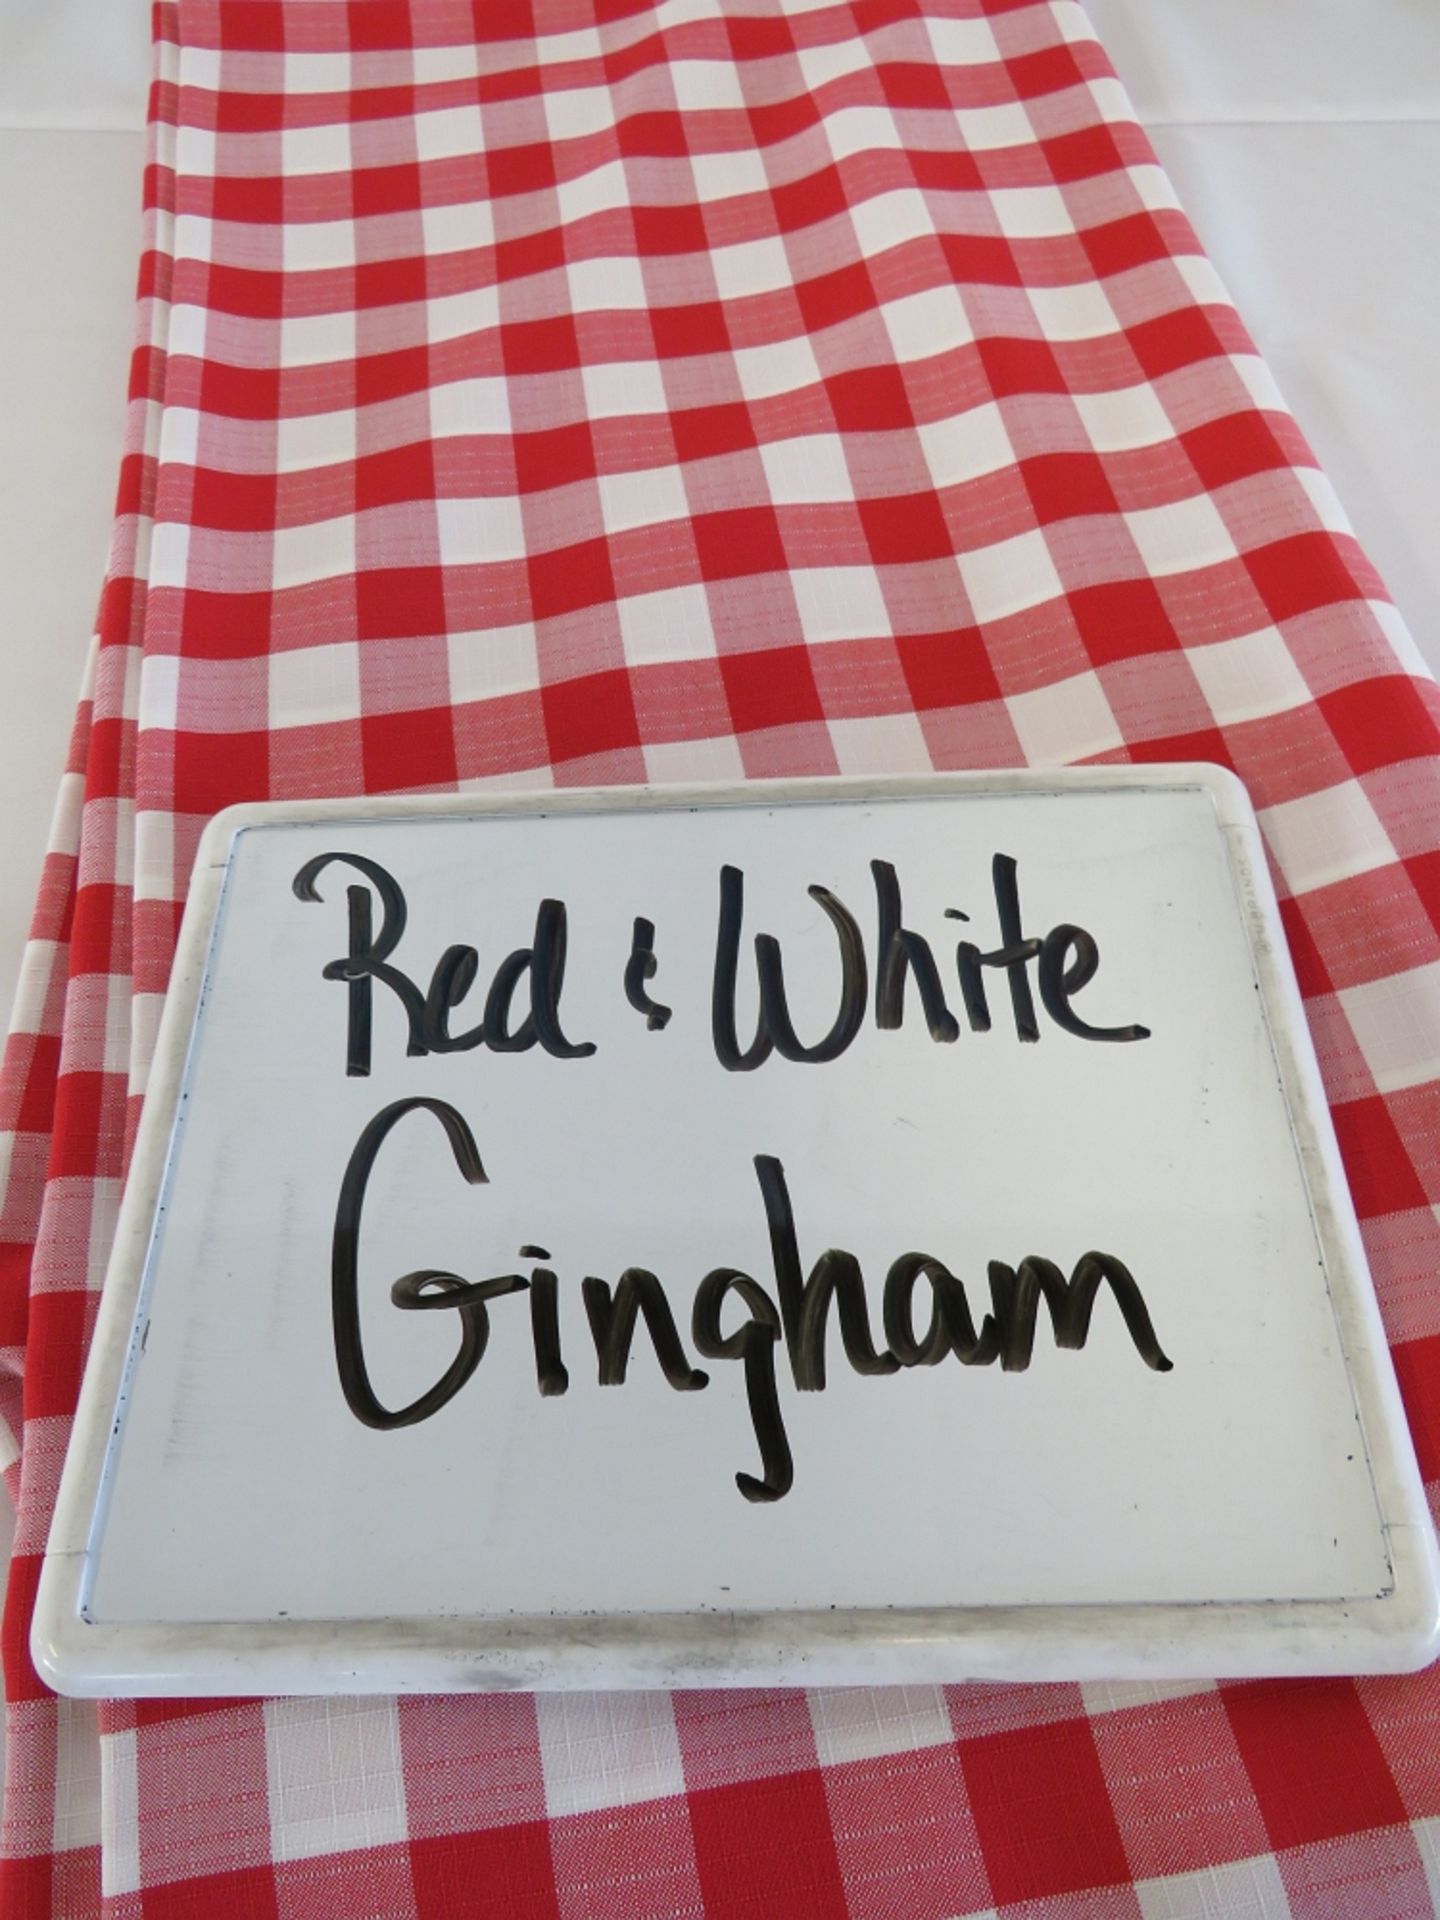 60" x 120" Tablecloth, Gingham Red